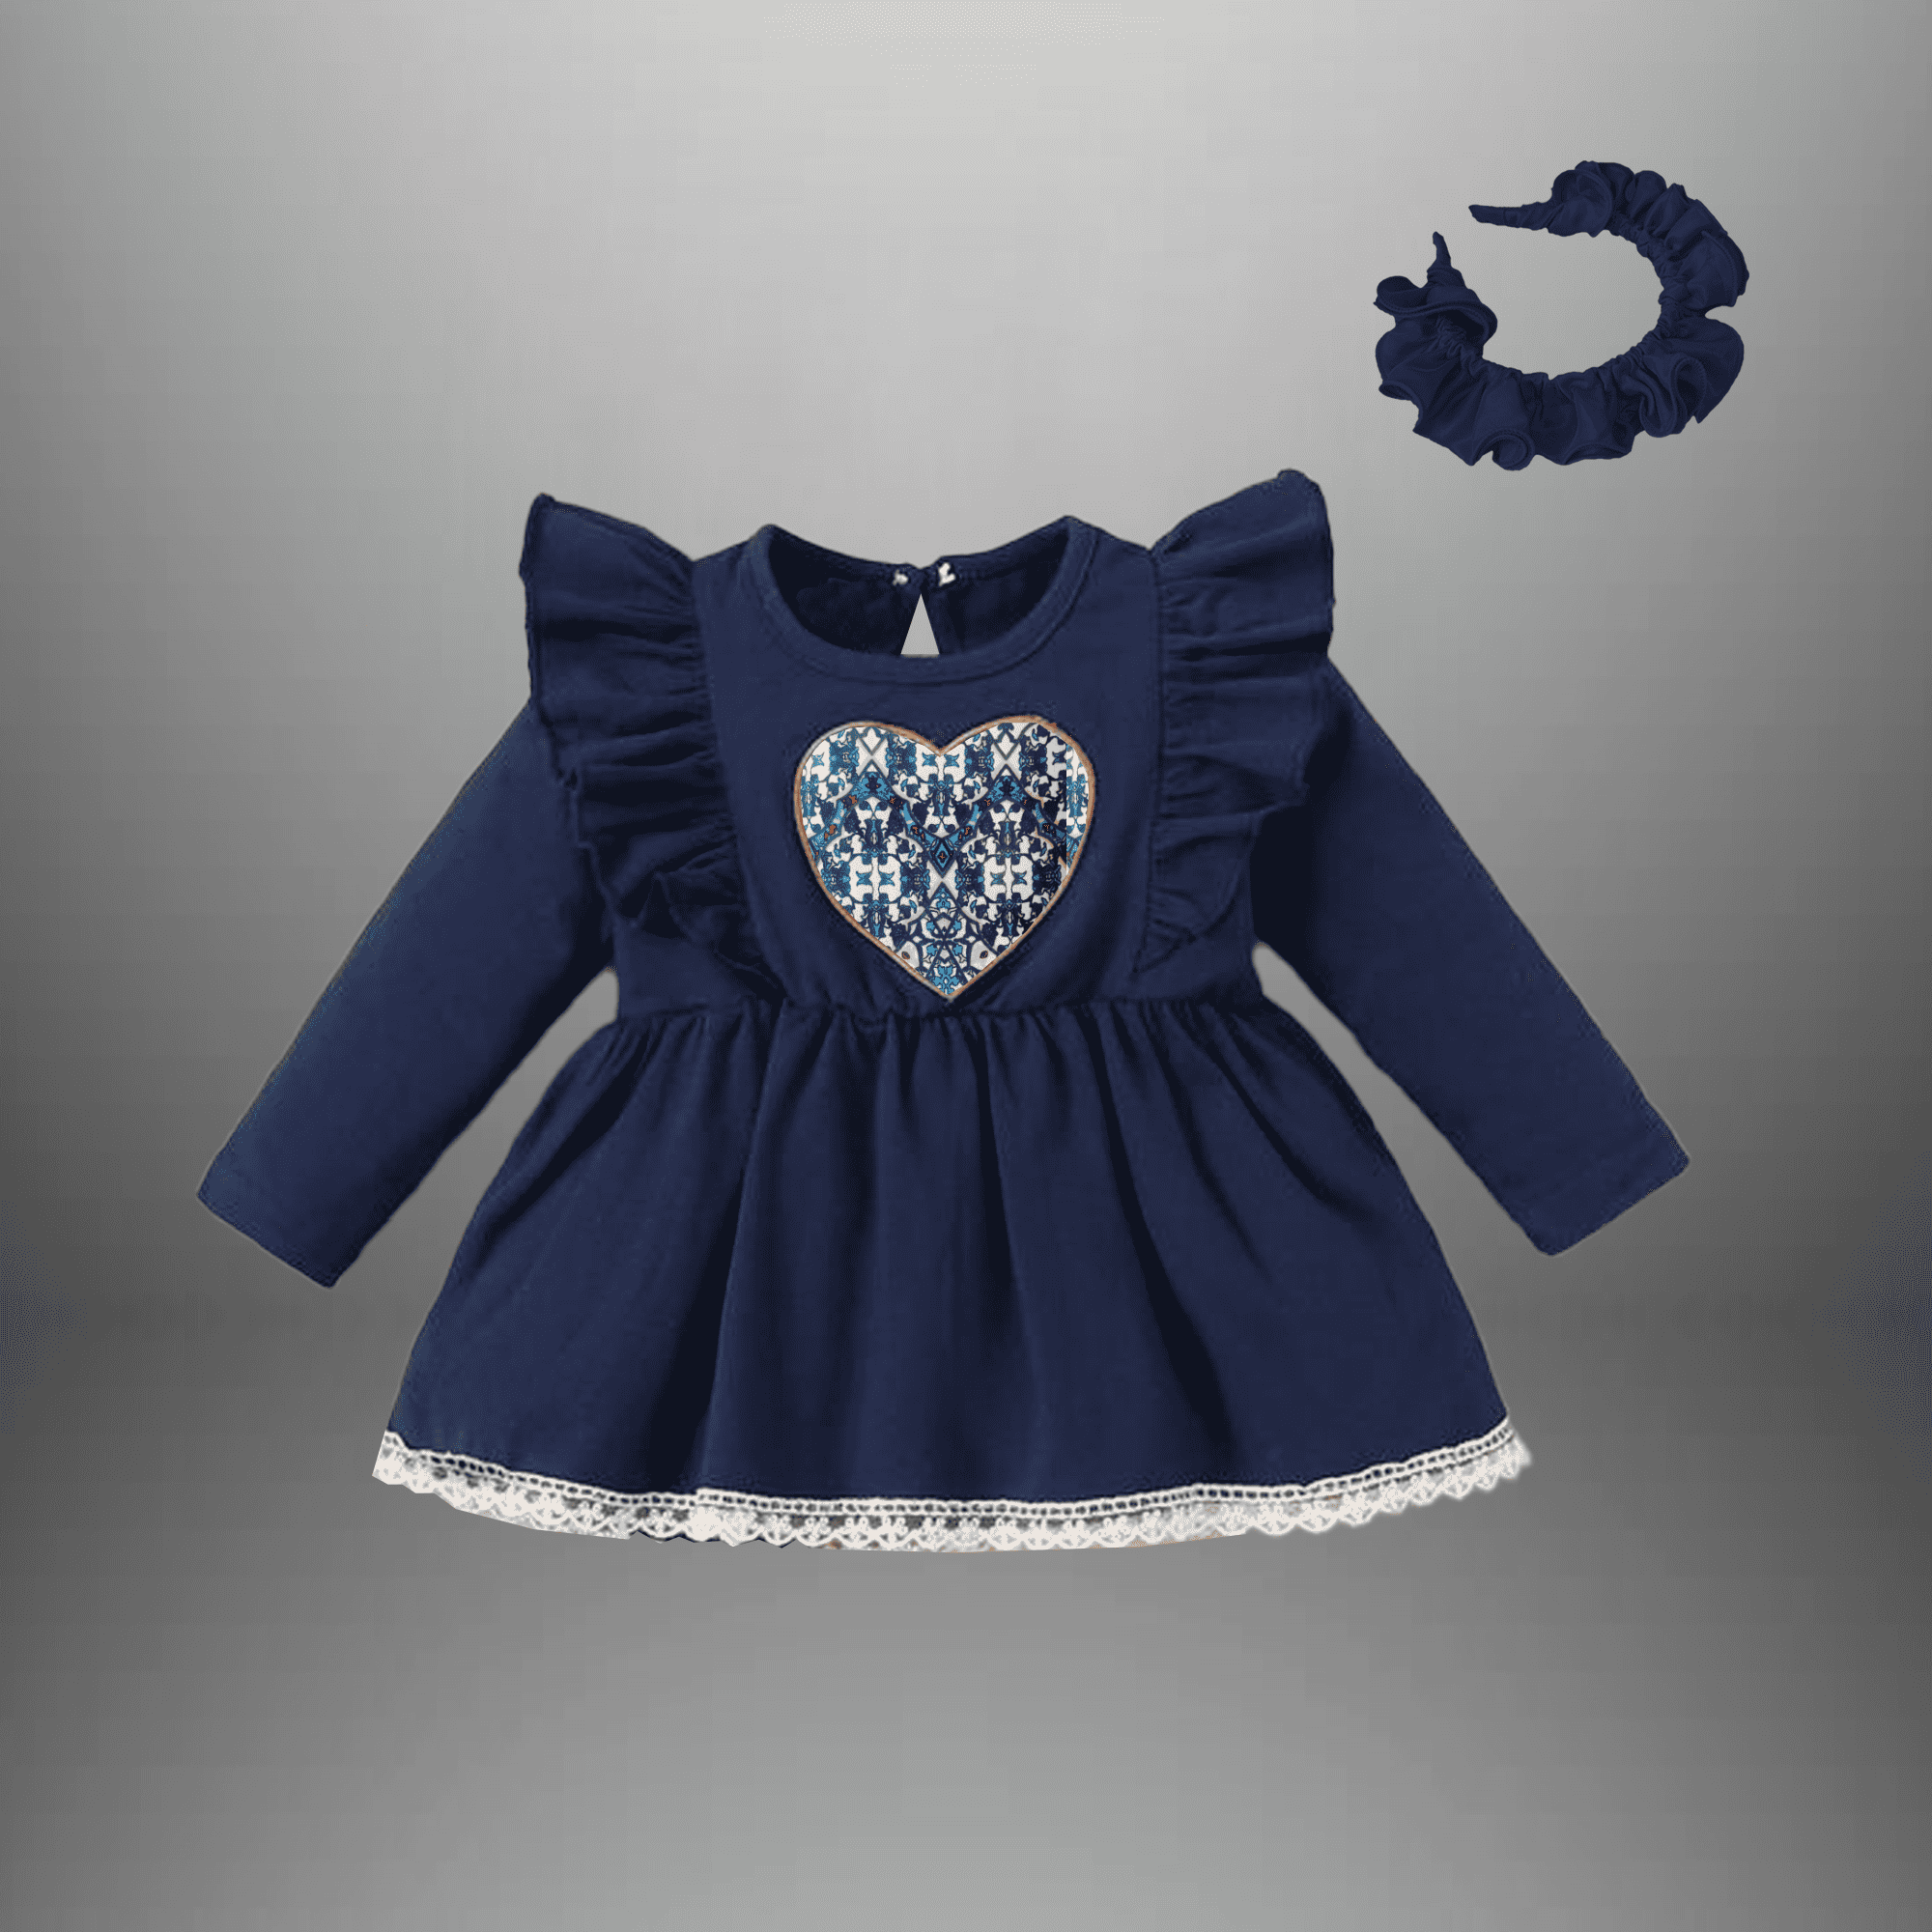 Toddler's Navy blue frock with lace border and patched heart-RKFCTT089